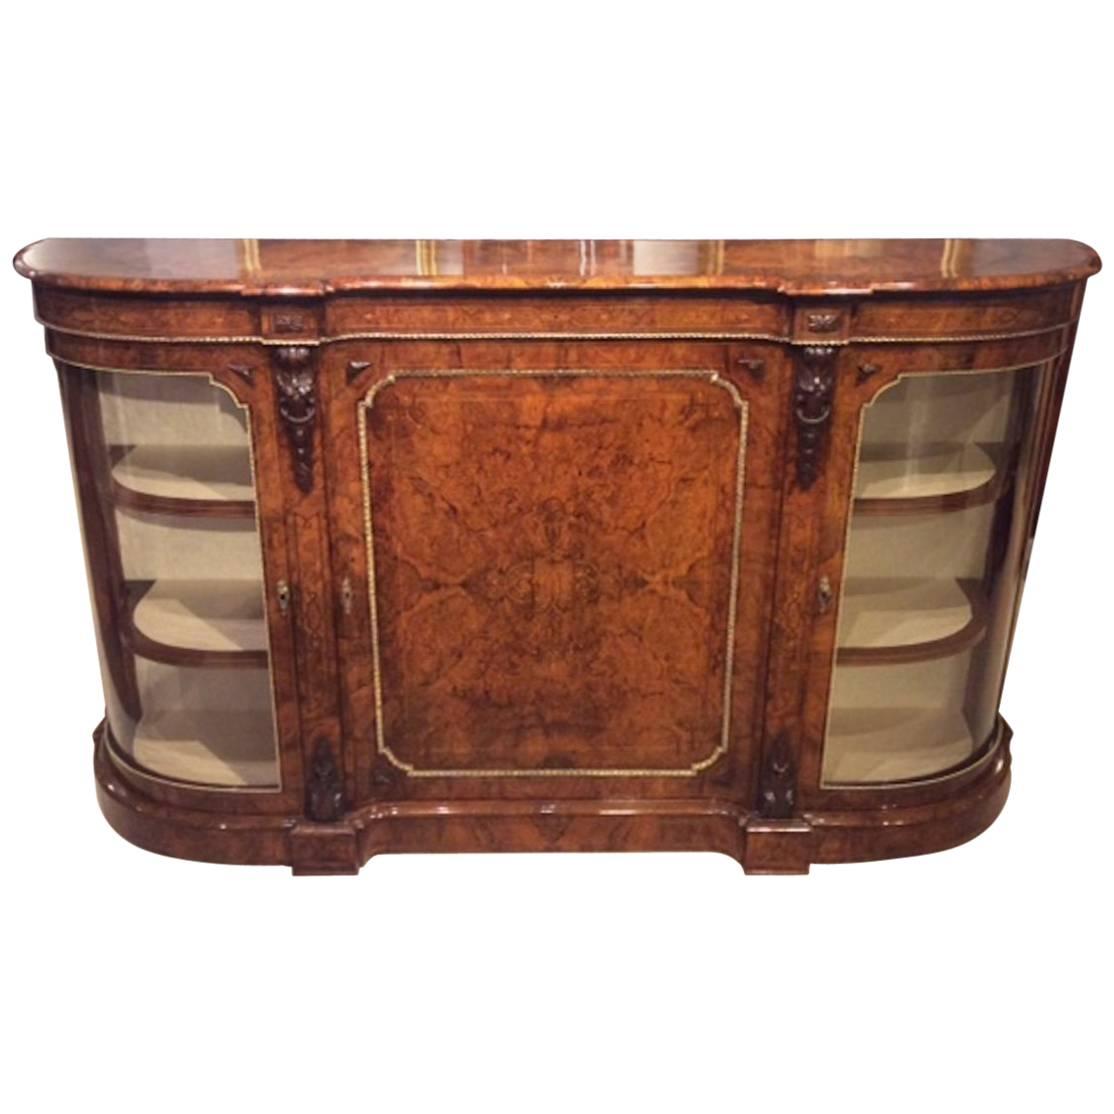 Stunning Quality Burr Walnut and Marquetry Inlaid Victorian Period Credenza For Sale